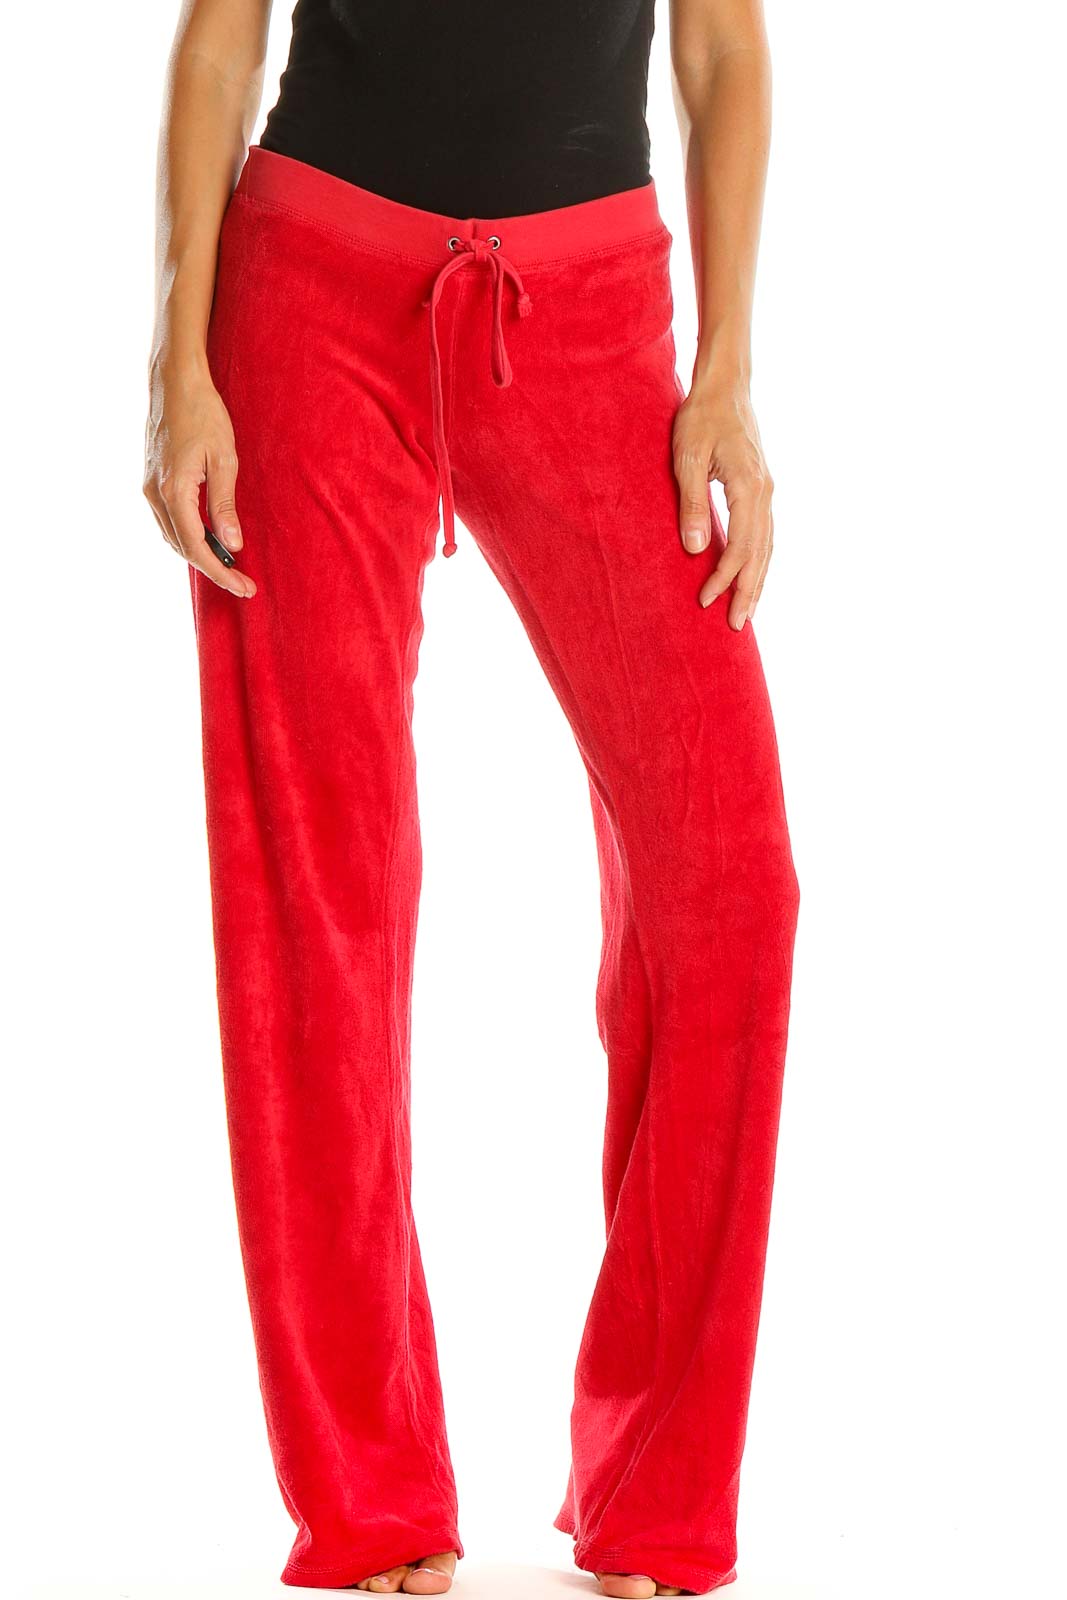 Red Retro Terrycloth Sweatpants Front